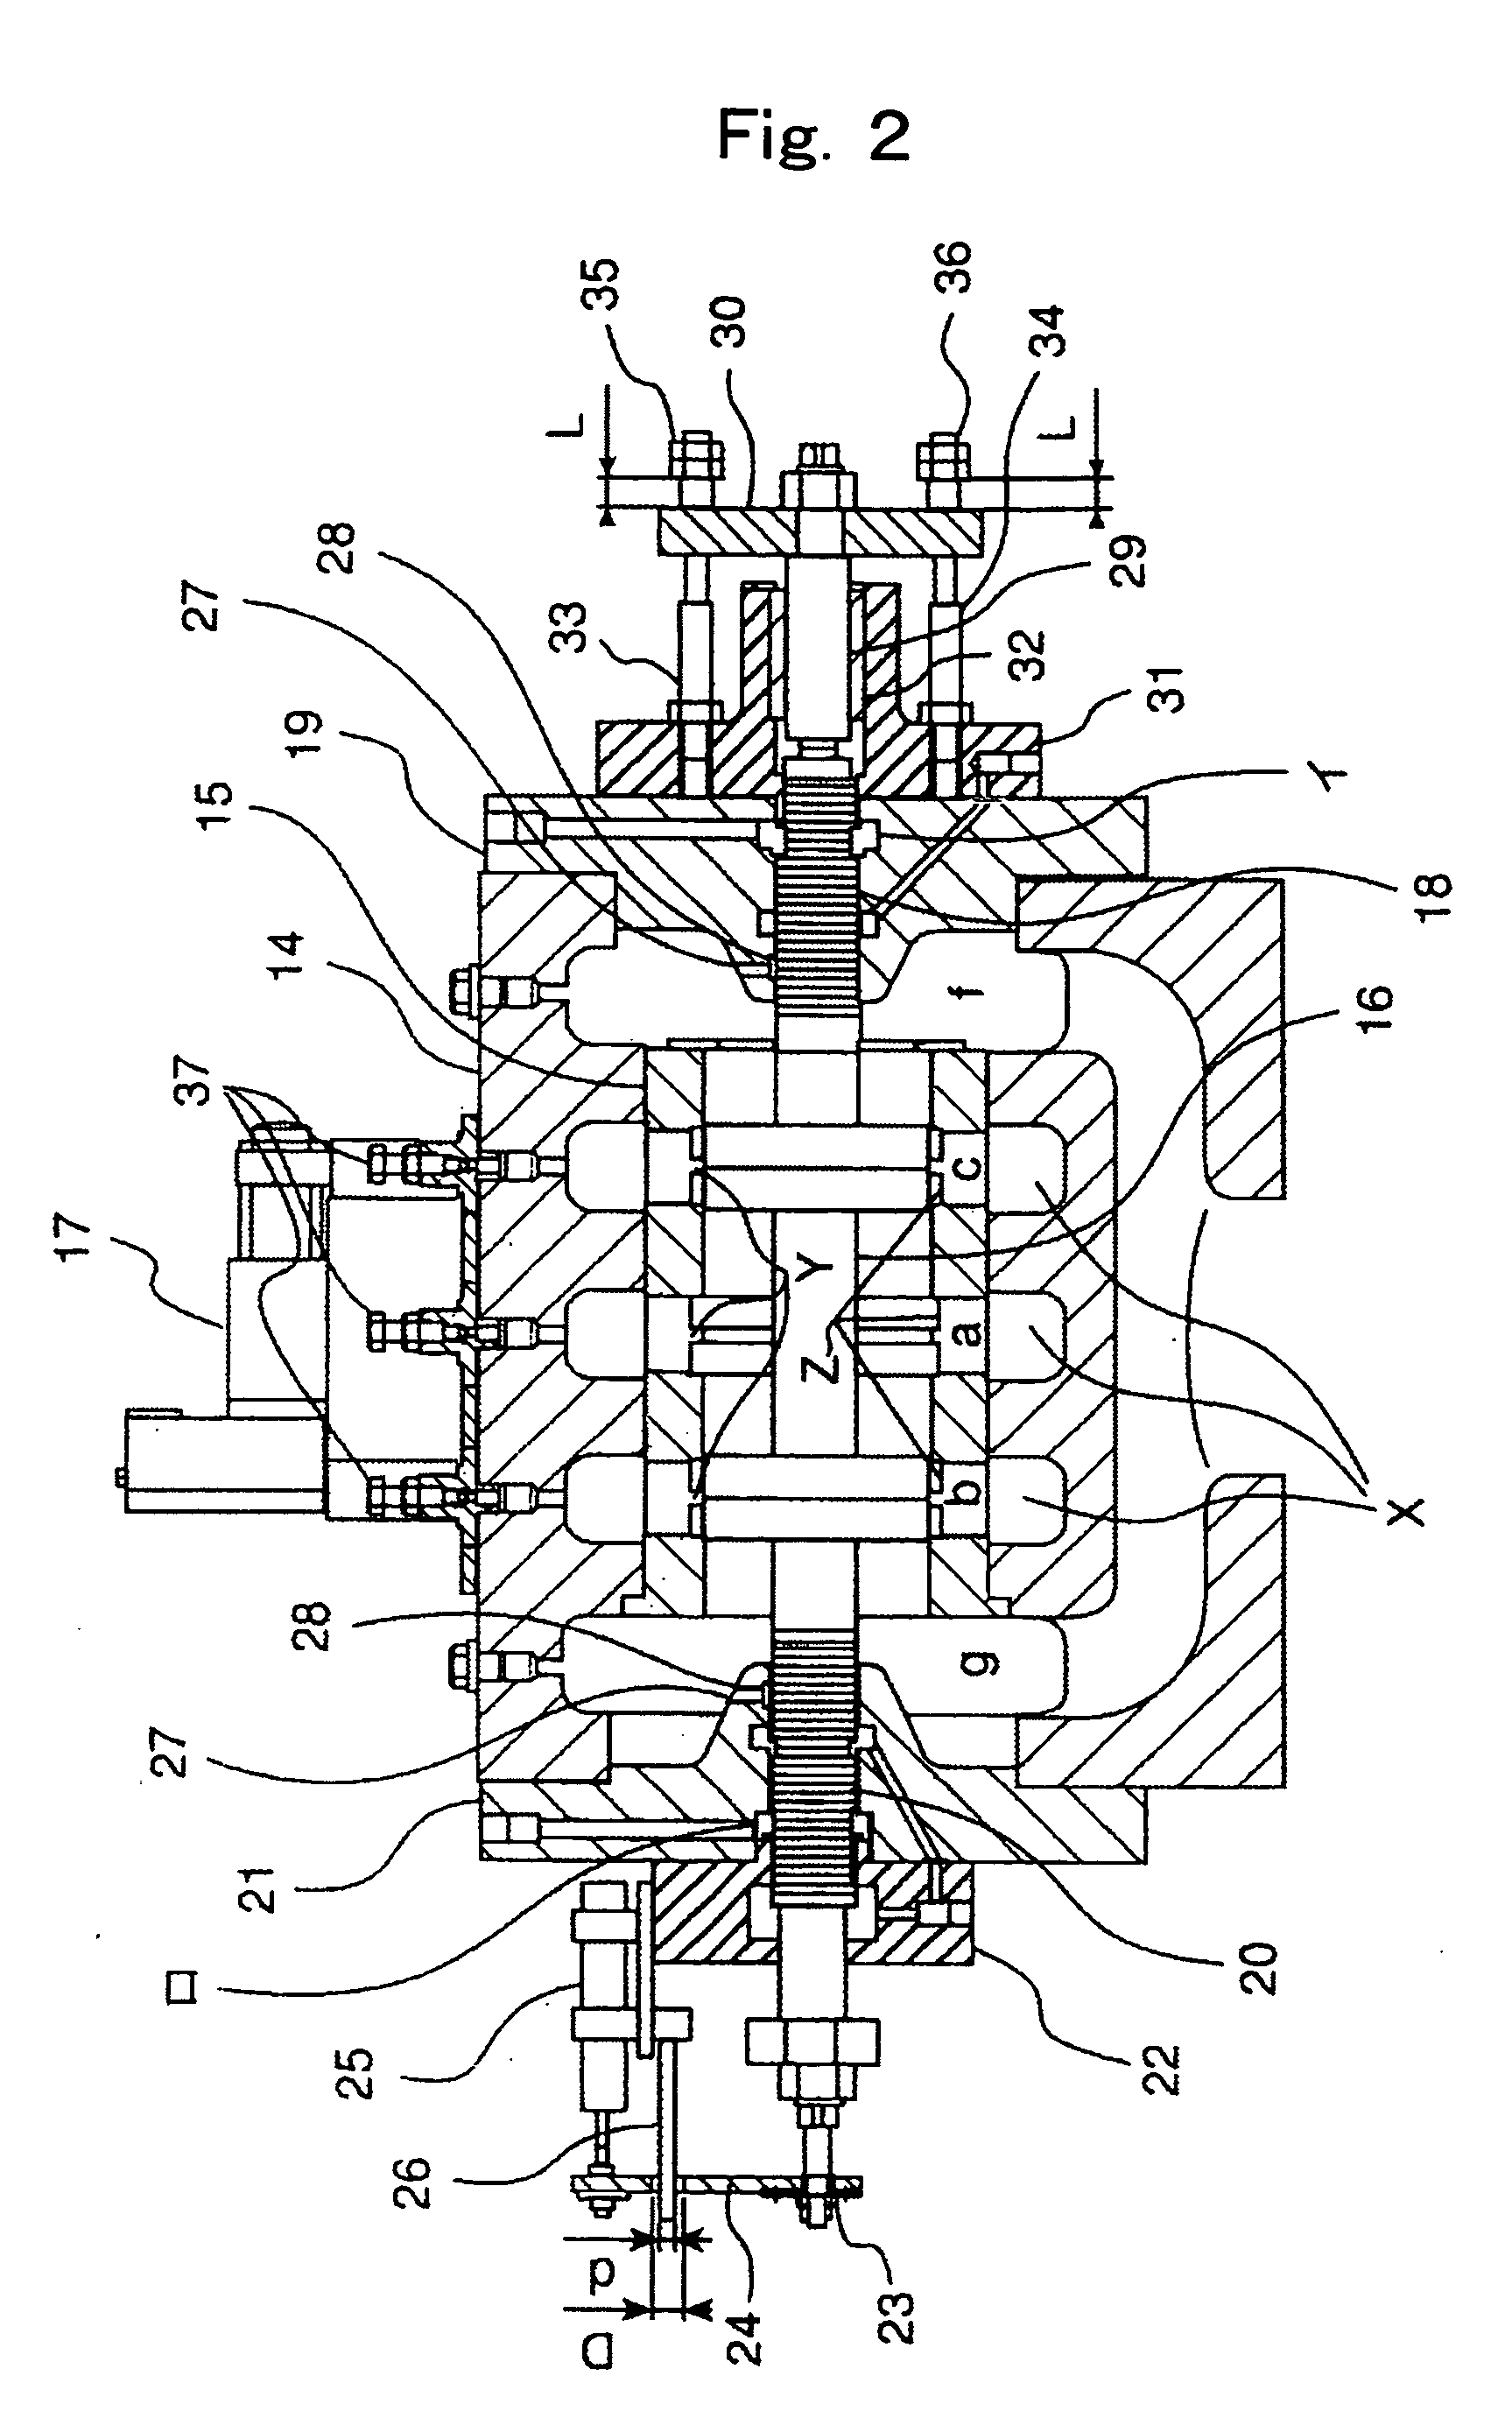 Speed governor and distributing valve for hydraulic turbines